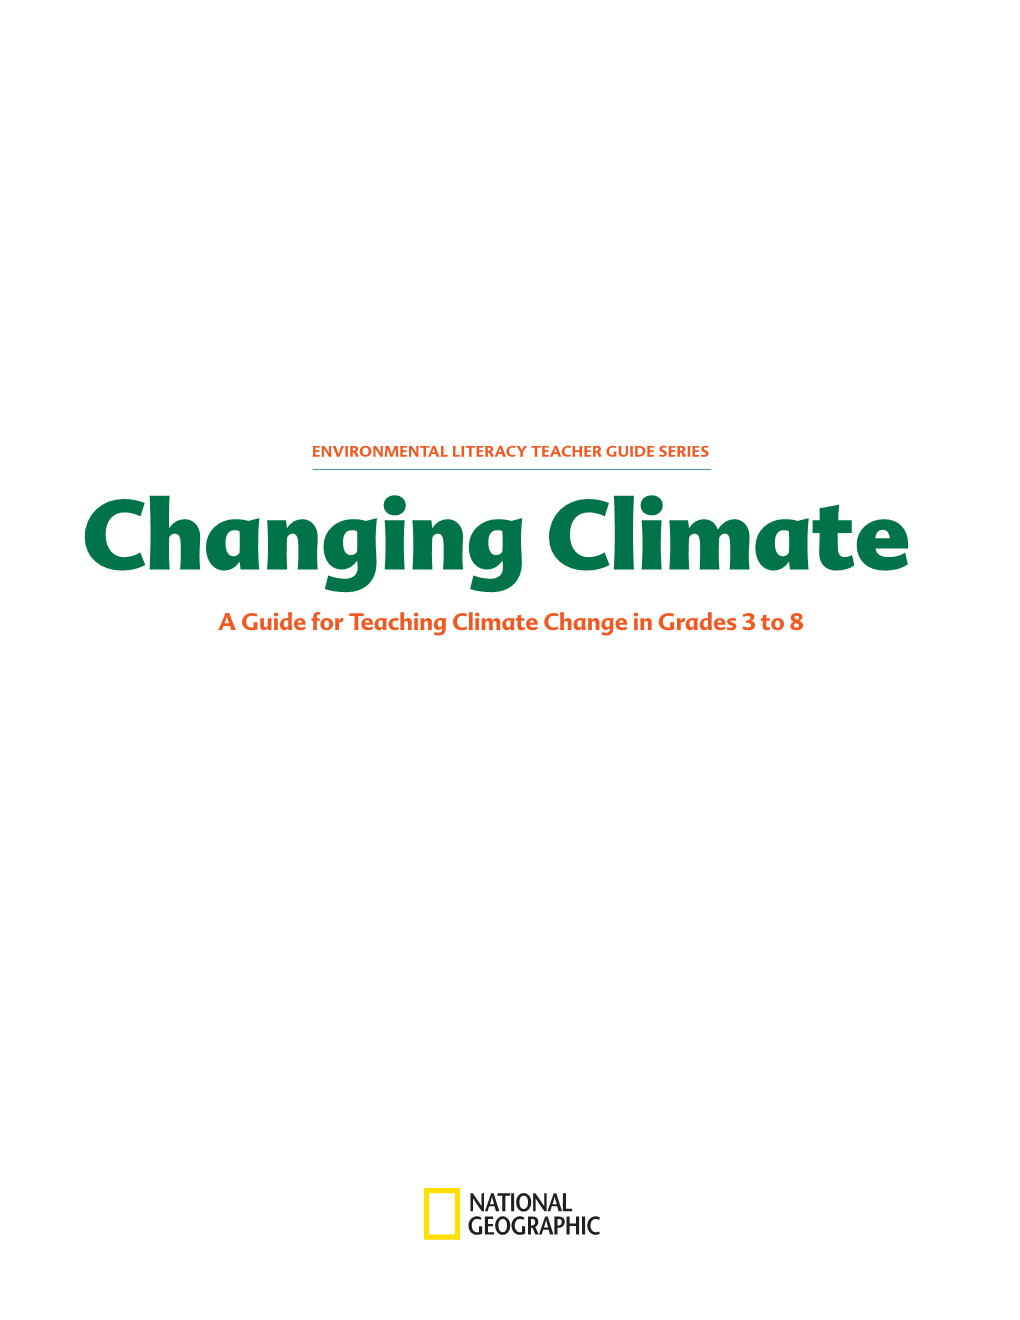 Modeling the Impacts of Climate Change